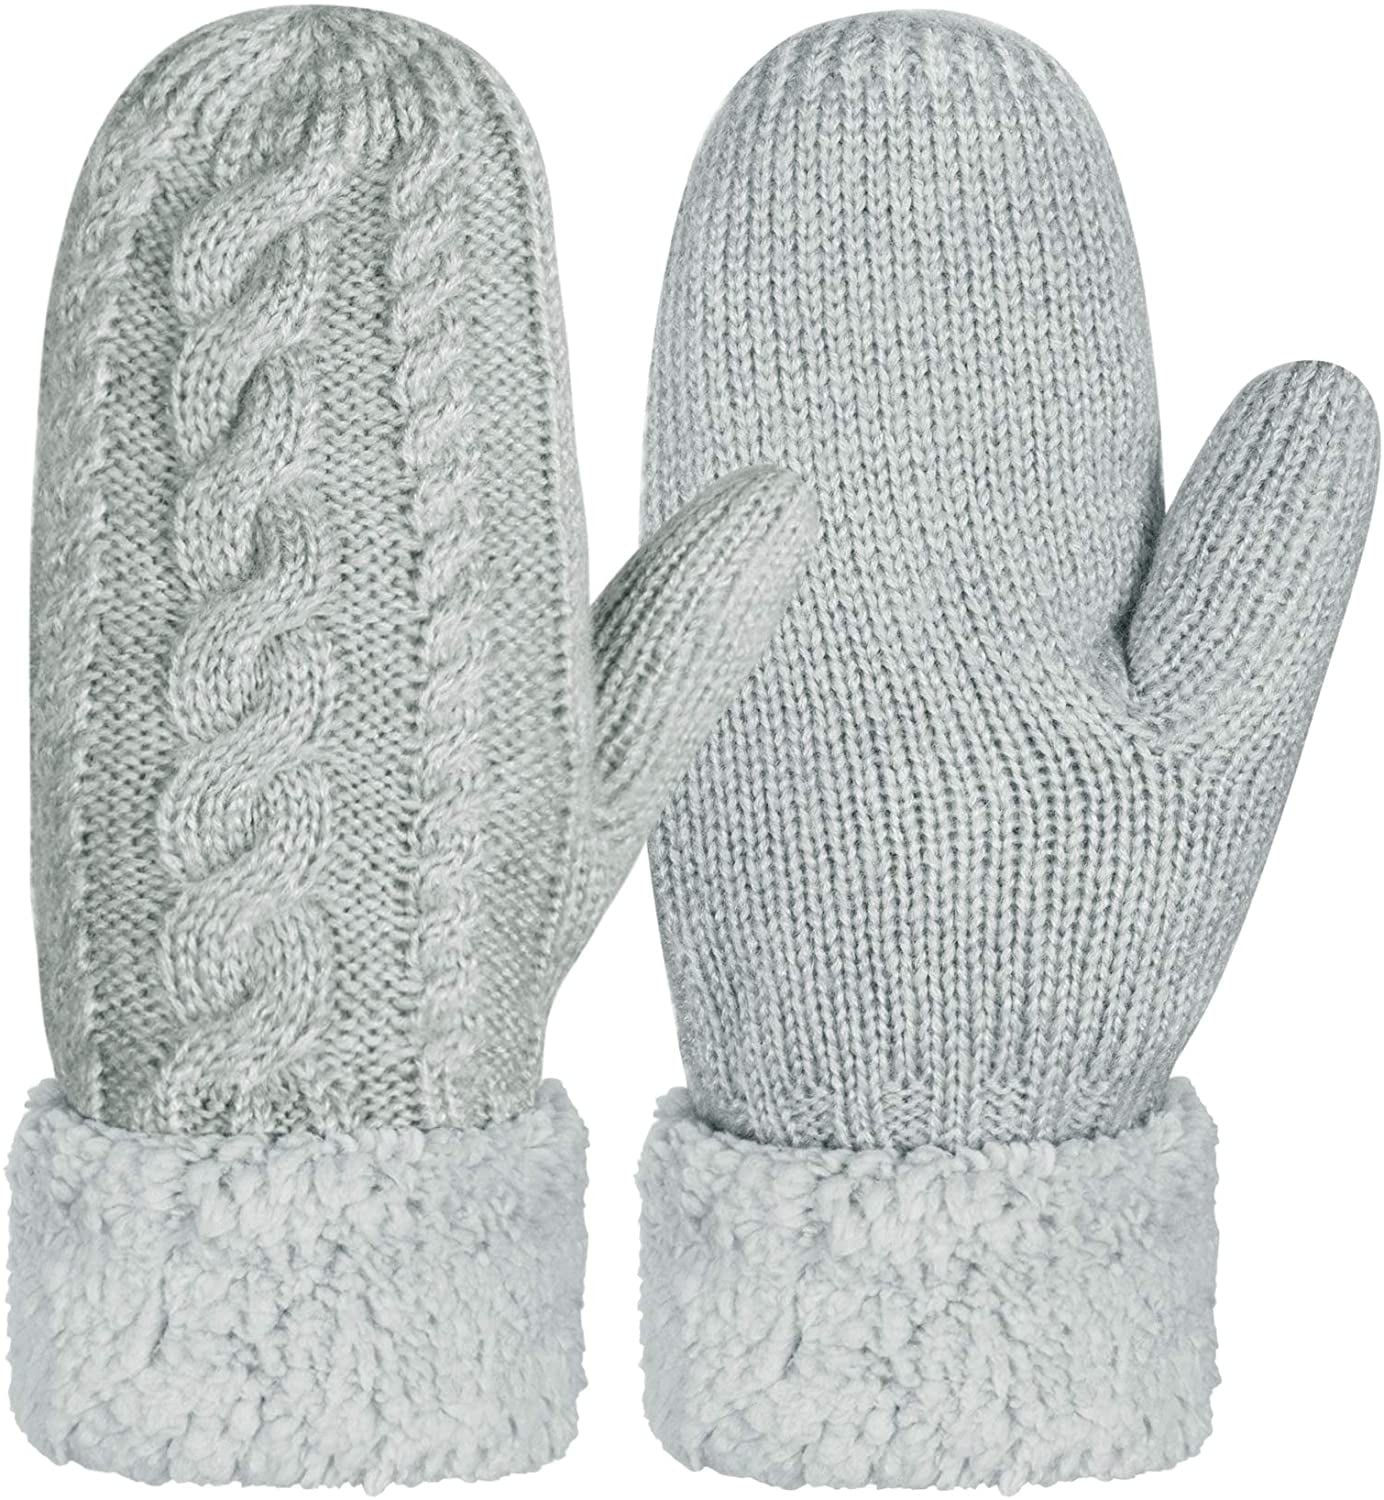 HQZY 1PACKChunky Cable Knit Mittens,Wool Knit Thick Gloves Novelty 